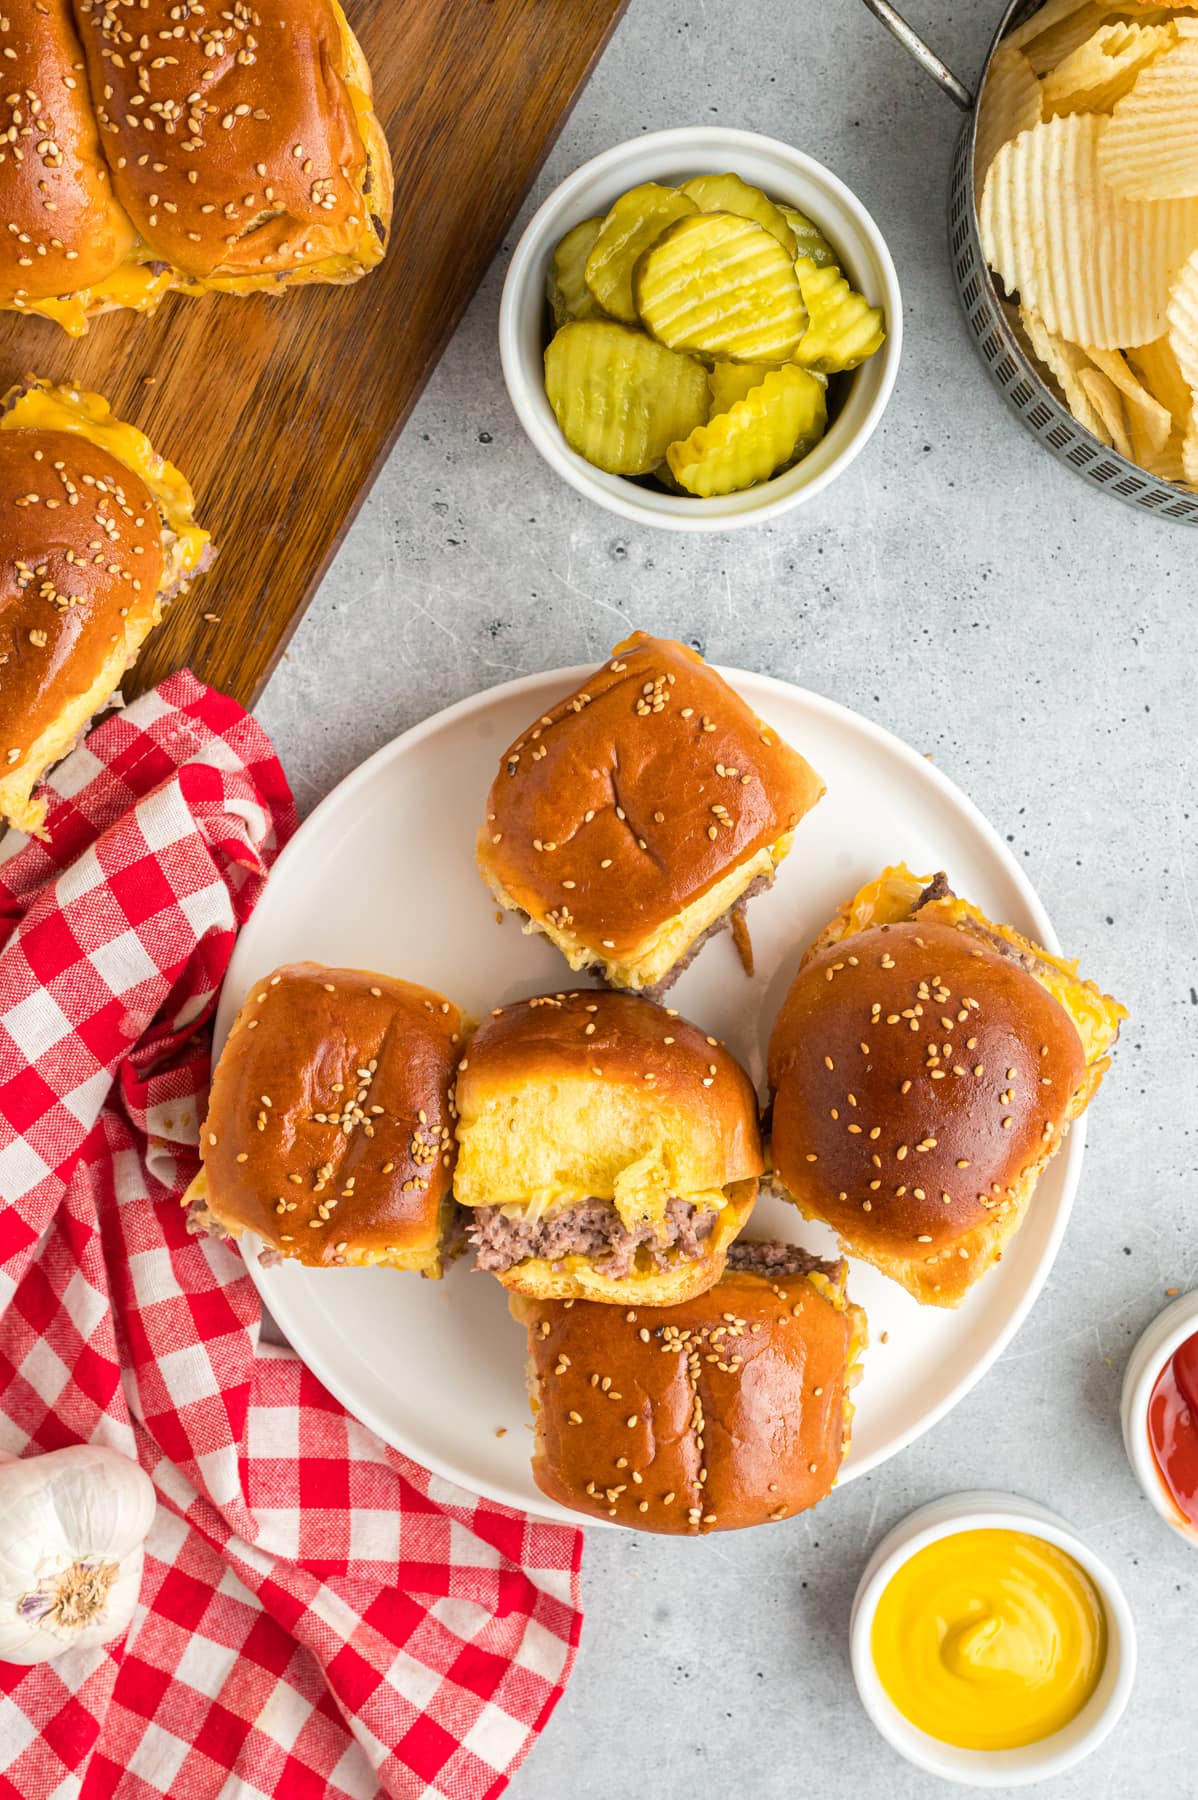 Cheeseburger sliders on a white plate.